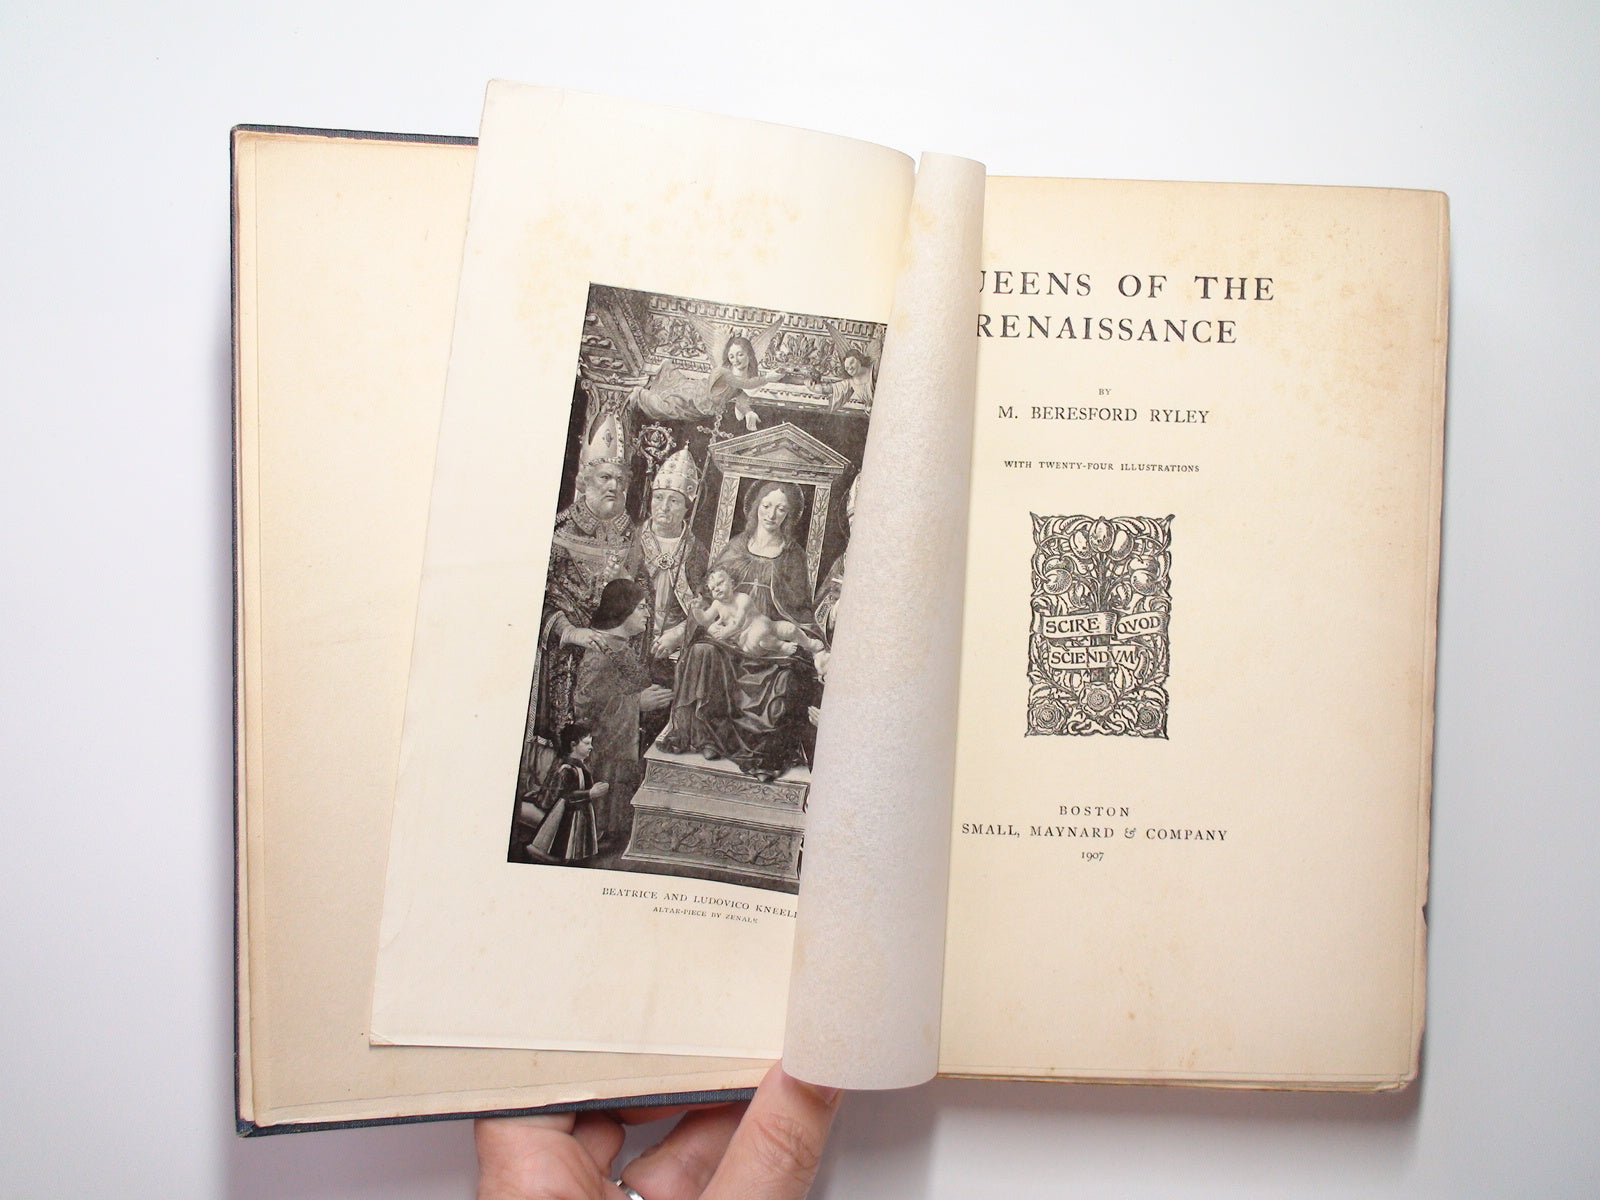 Queens of the Renaissance, by M. Beresford Ryley, Illustrated, 1st Ed., 1907